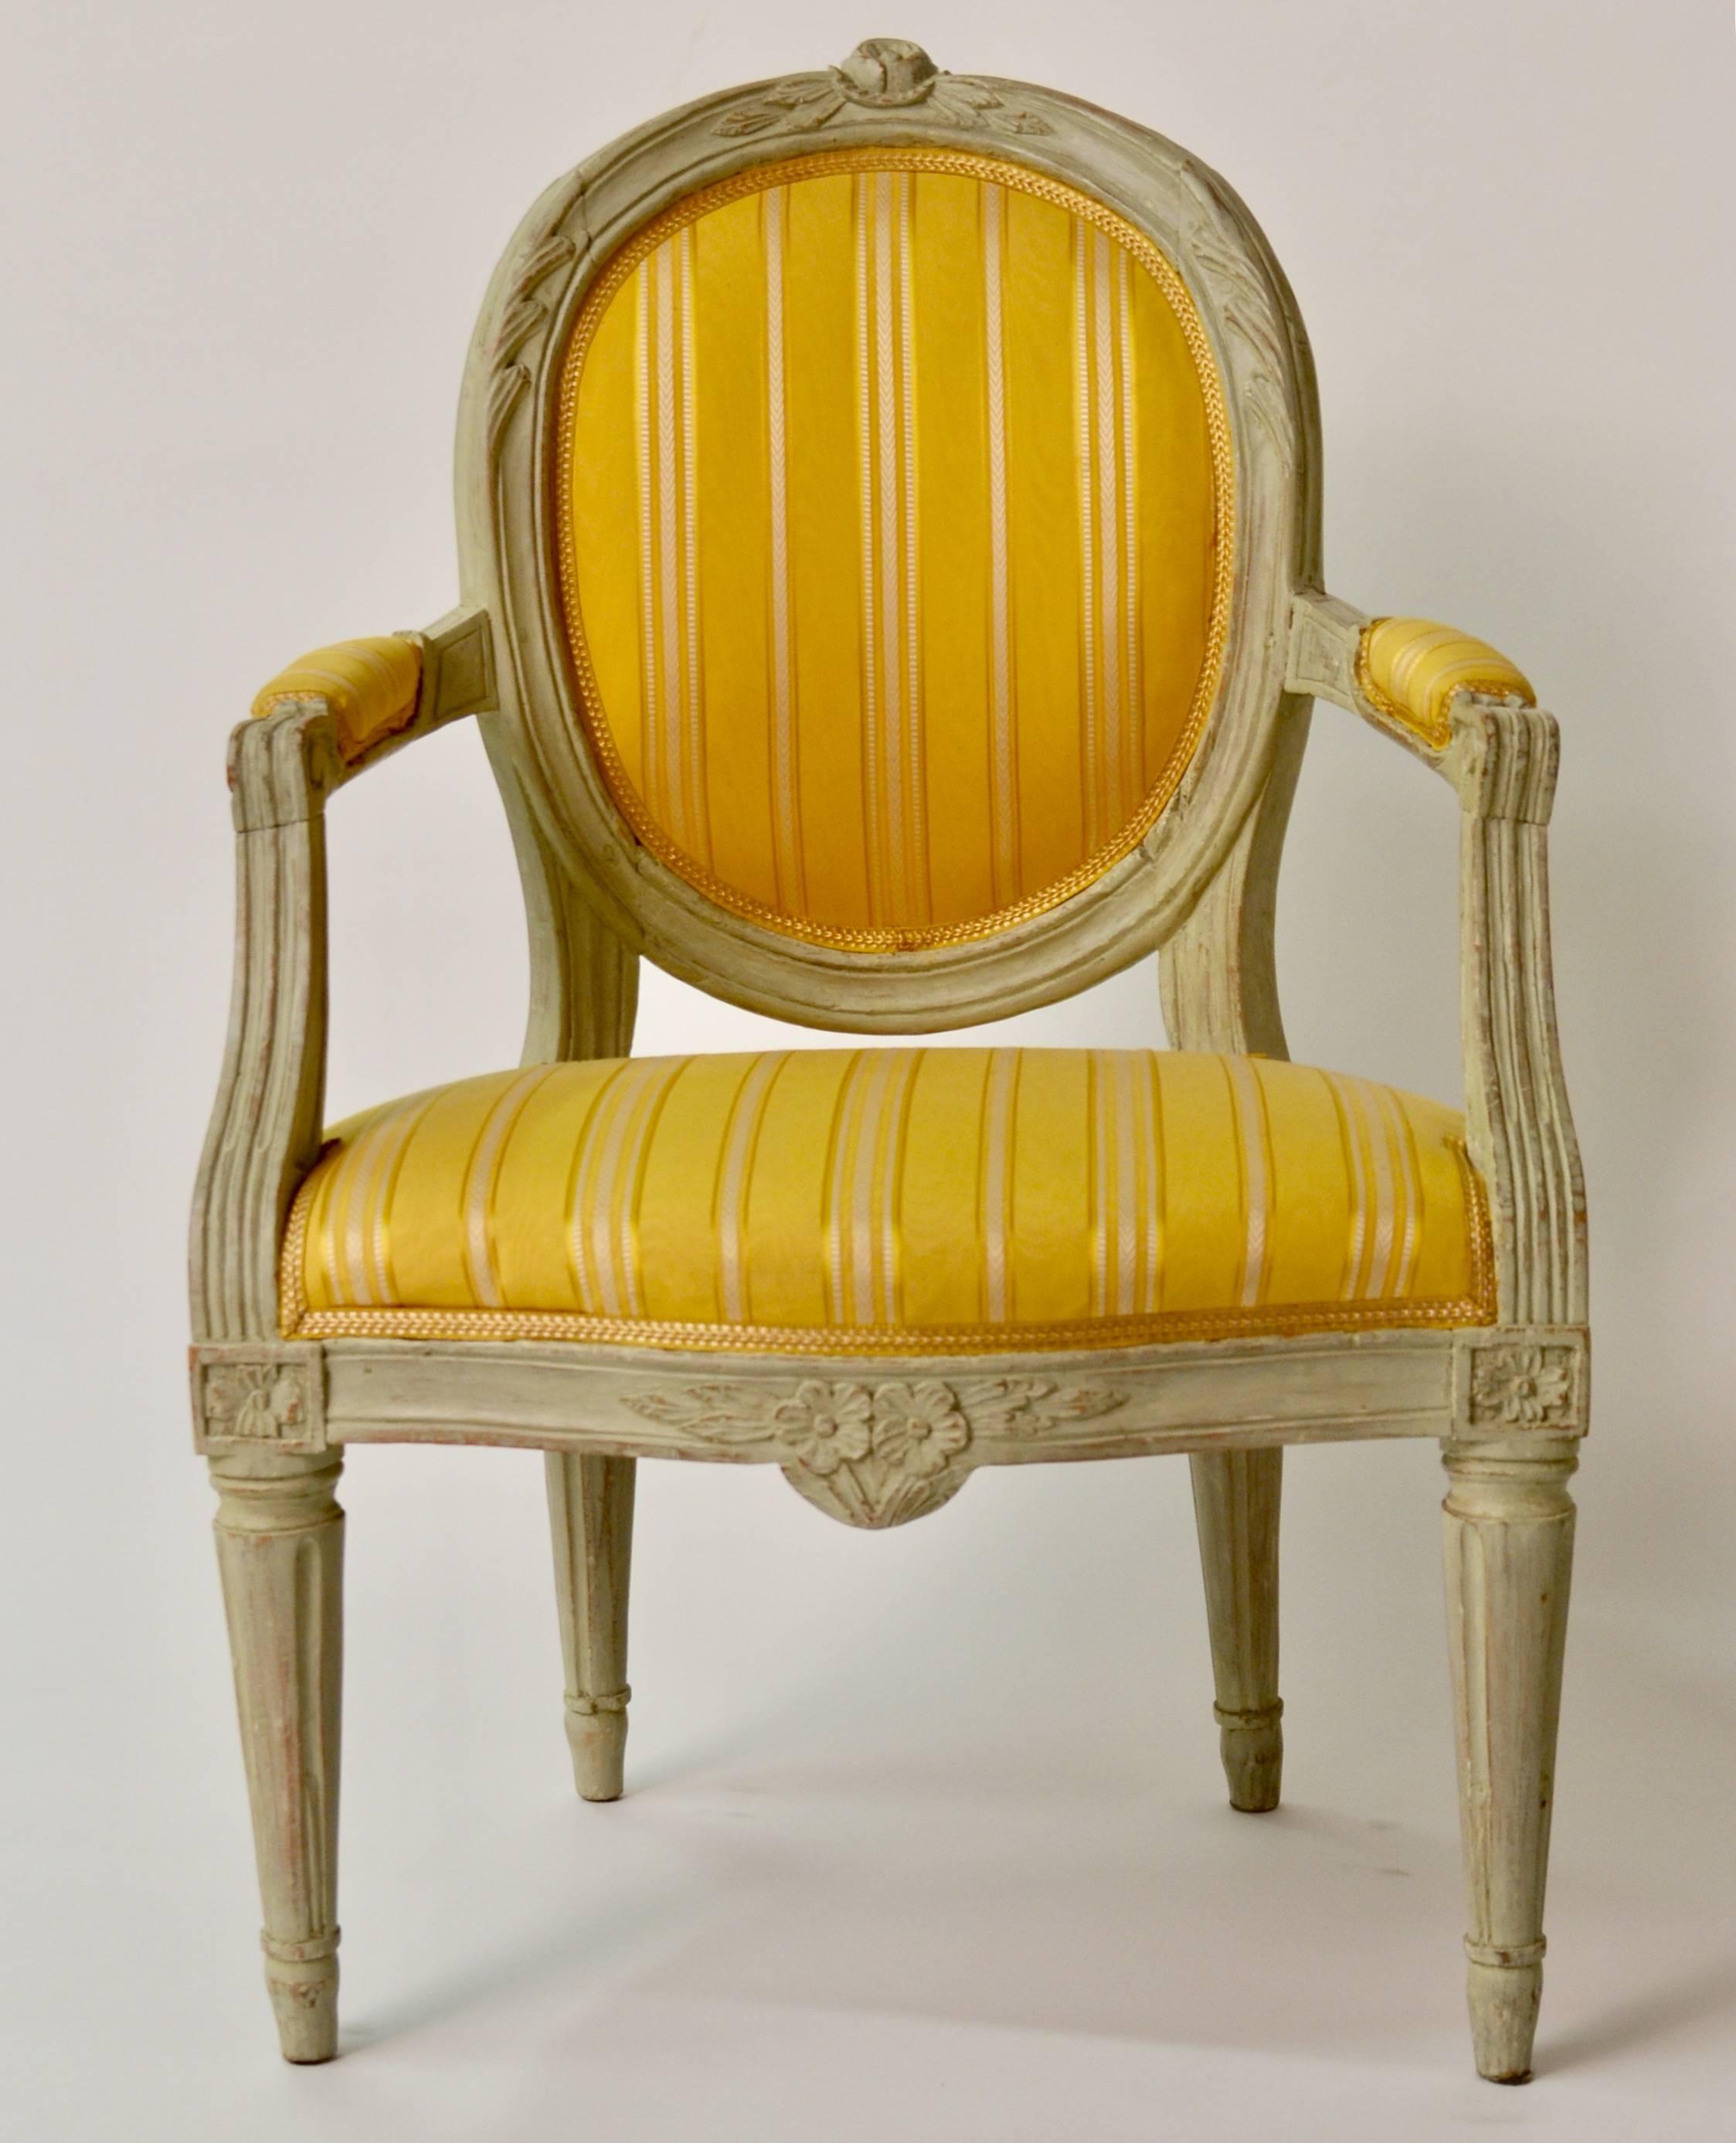 Pair of Gustavian period, circa 1780. Original painted seating.

Dimensions: Seat height: 17 inches, height 36.5 inches, width 24 inch; seat depth 22 inch.

Condition: Very good.